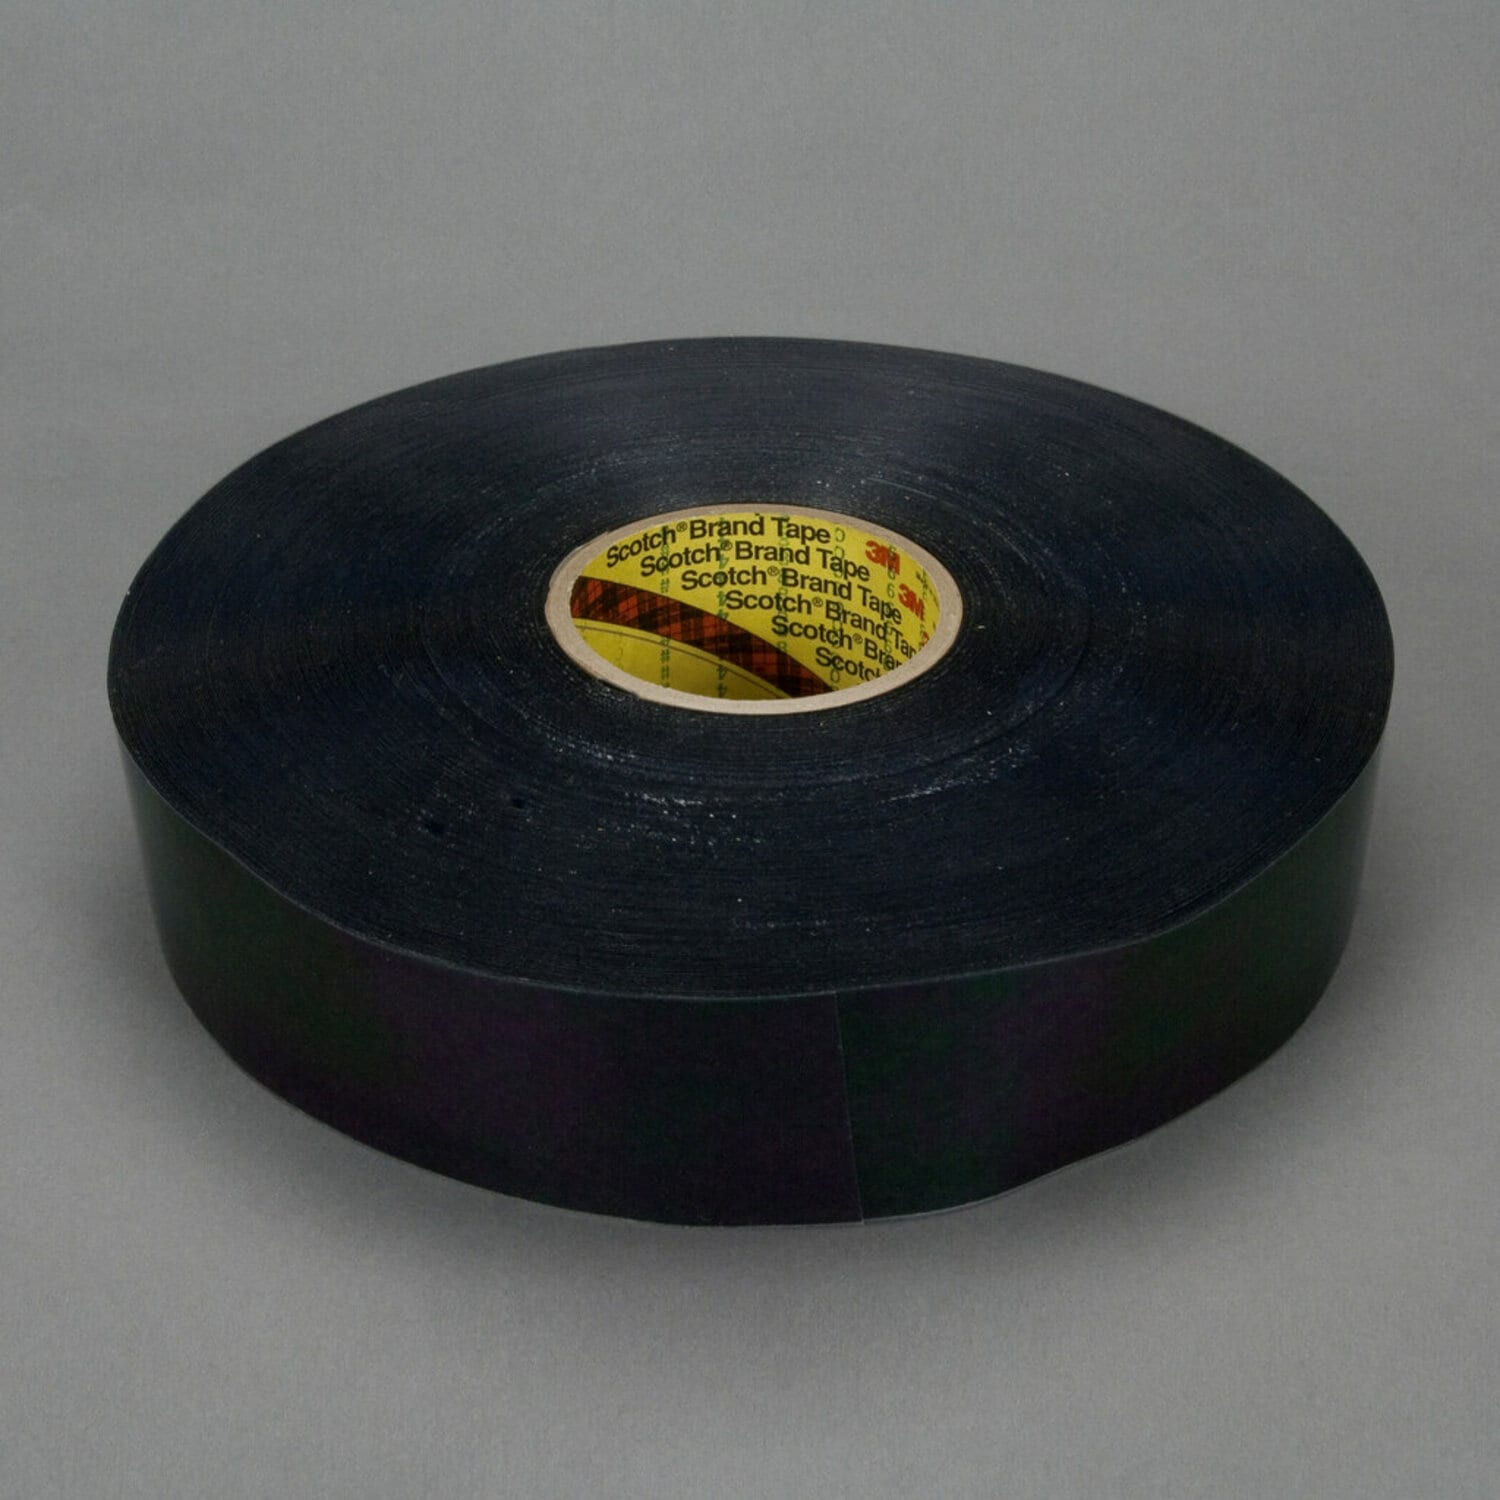 7000001986 - 3M Conformable Sound Management Film Tape 9343, Black, 19 in x 108 yd,
1 roll per case